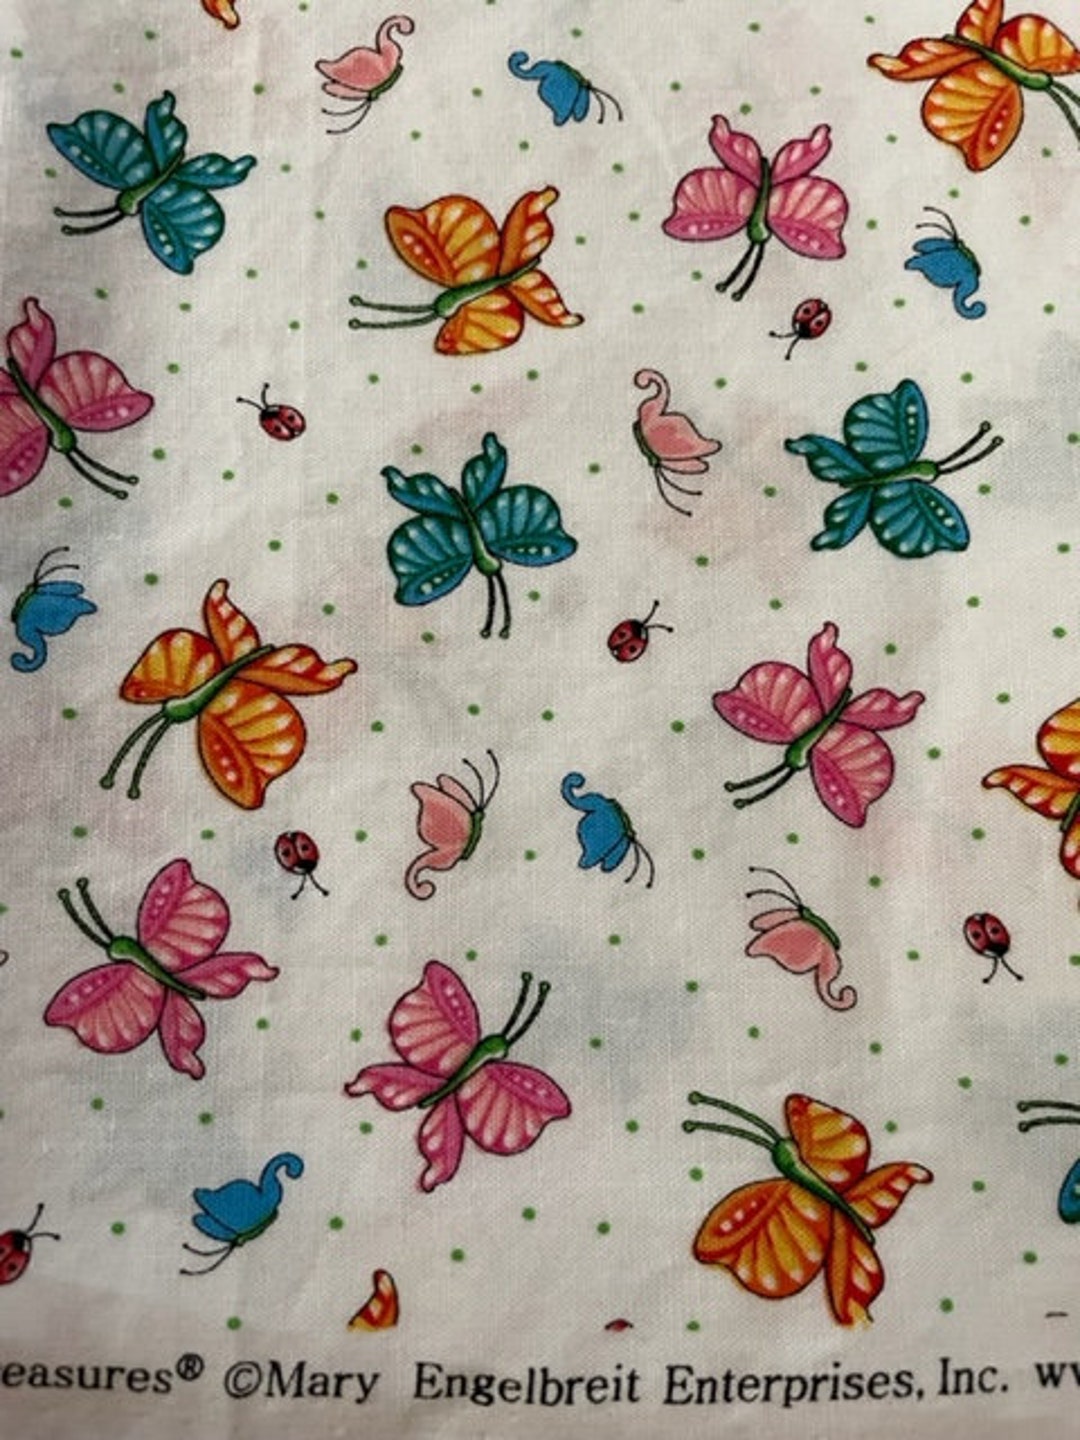 Mary Engelbreit Butterfly Fabric - Etsy